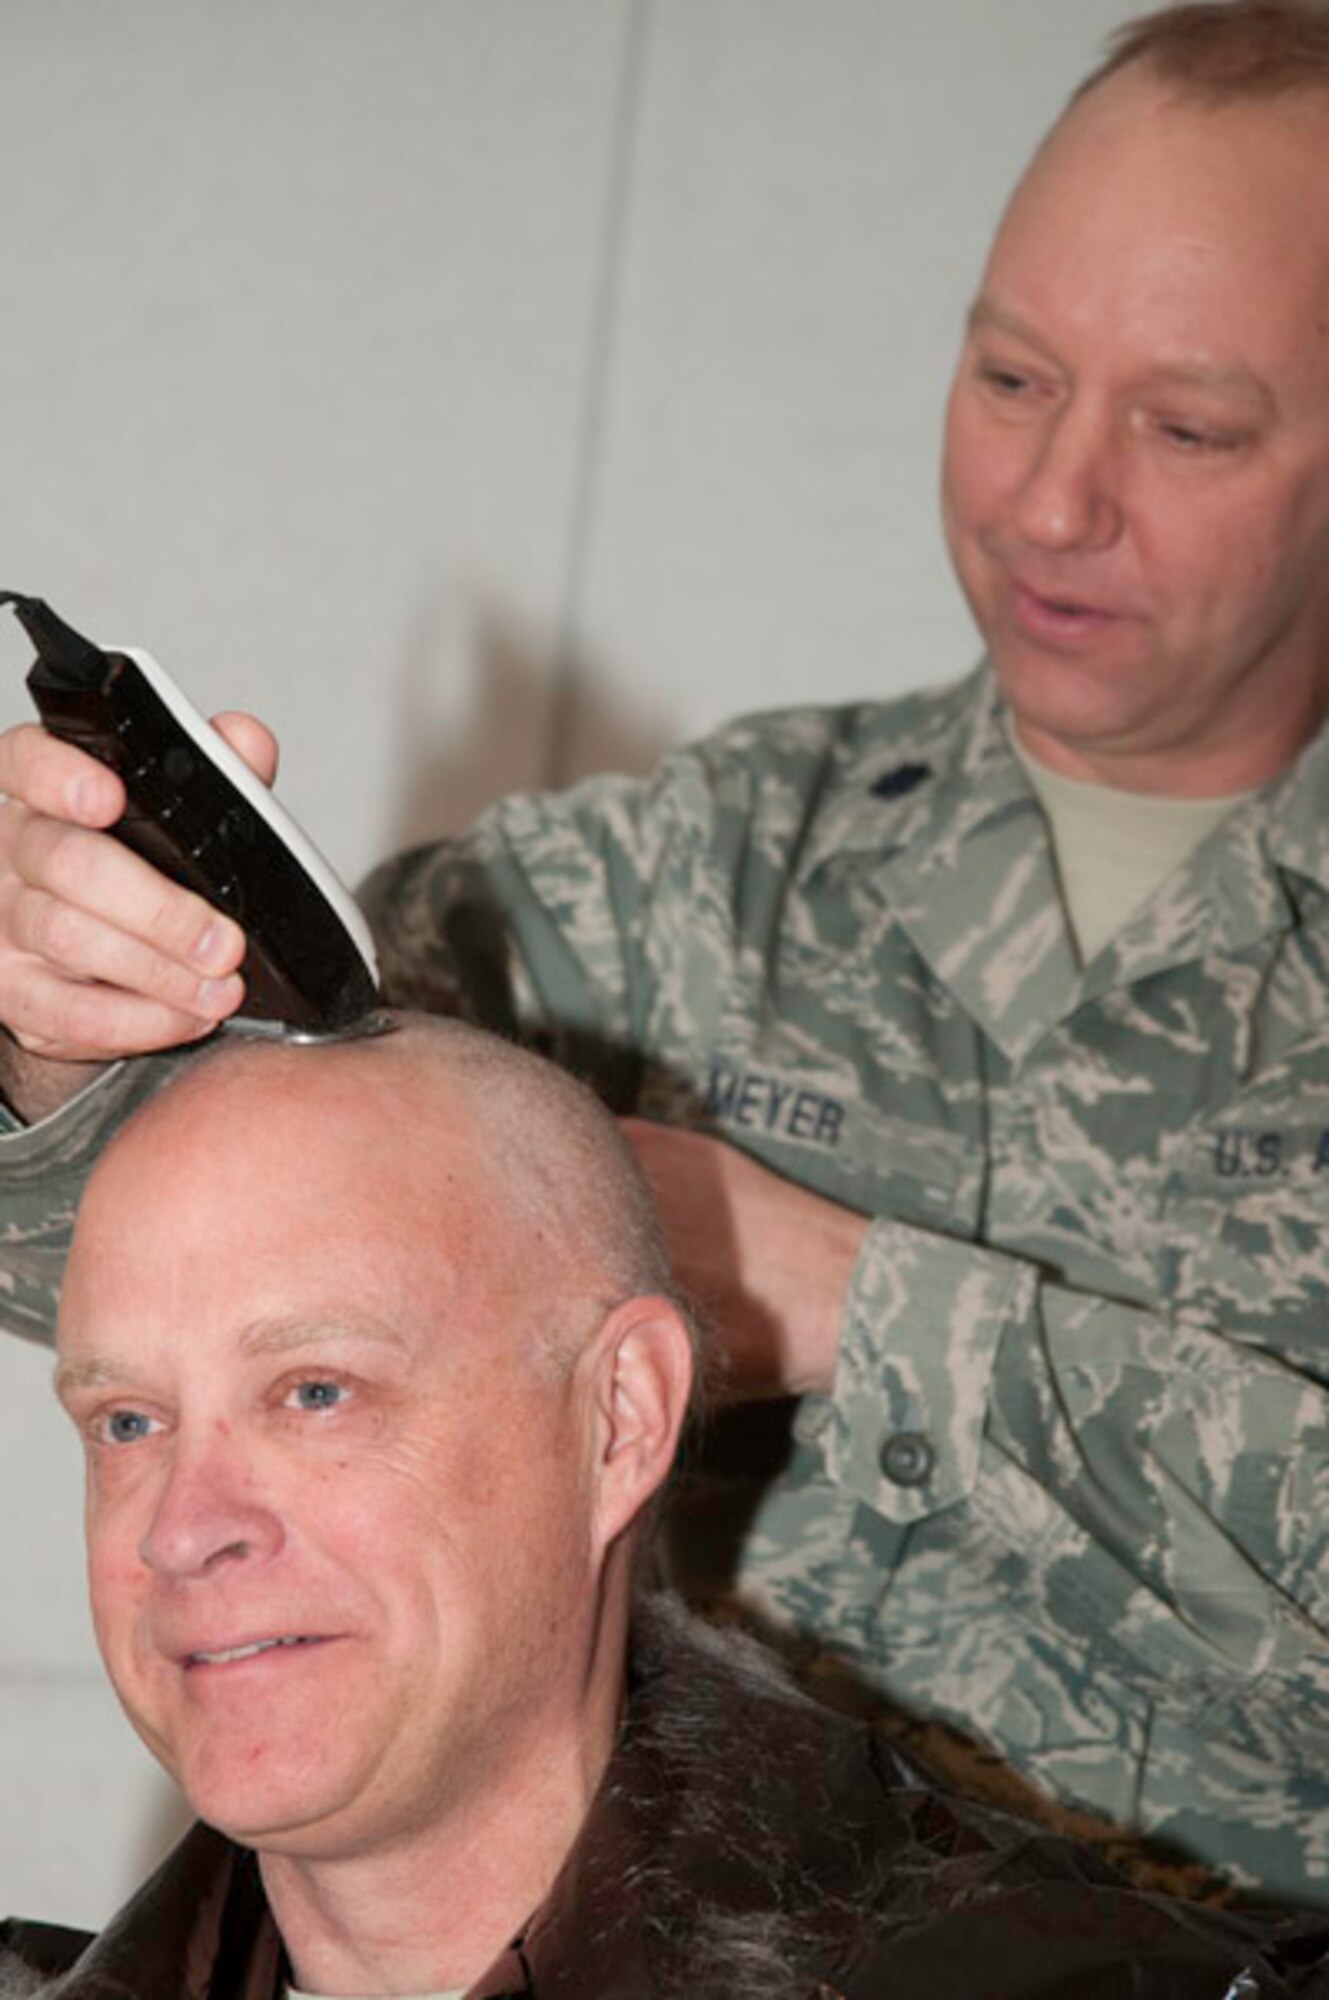 After receiving the grade of outstanding after a recent inspection, as promised, Colonel Andy Halter, 139th maintenance group commander, surrendered his hair on stage, January 11, 2010. Capt. Orth and Lt.Col. Gordon Meyer, 139th Maintenance, were happy to oblige the group commander. (U.S. Air Force photo by Master Sgt. Shannon Bond)